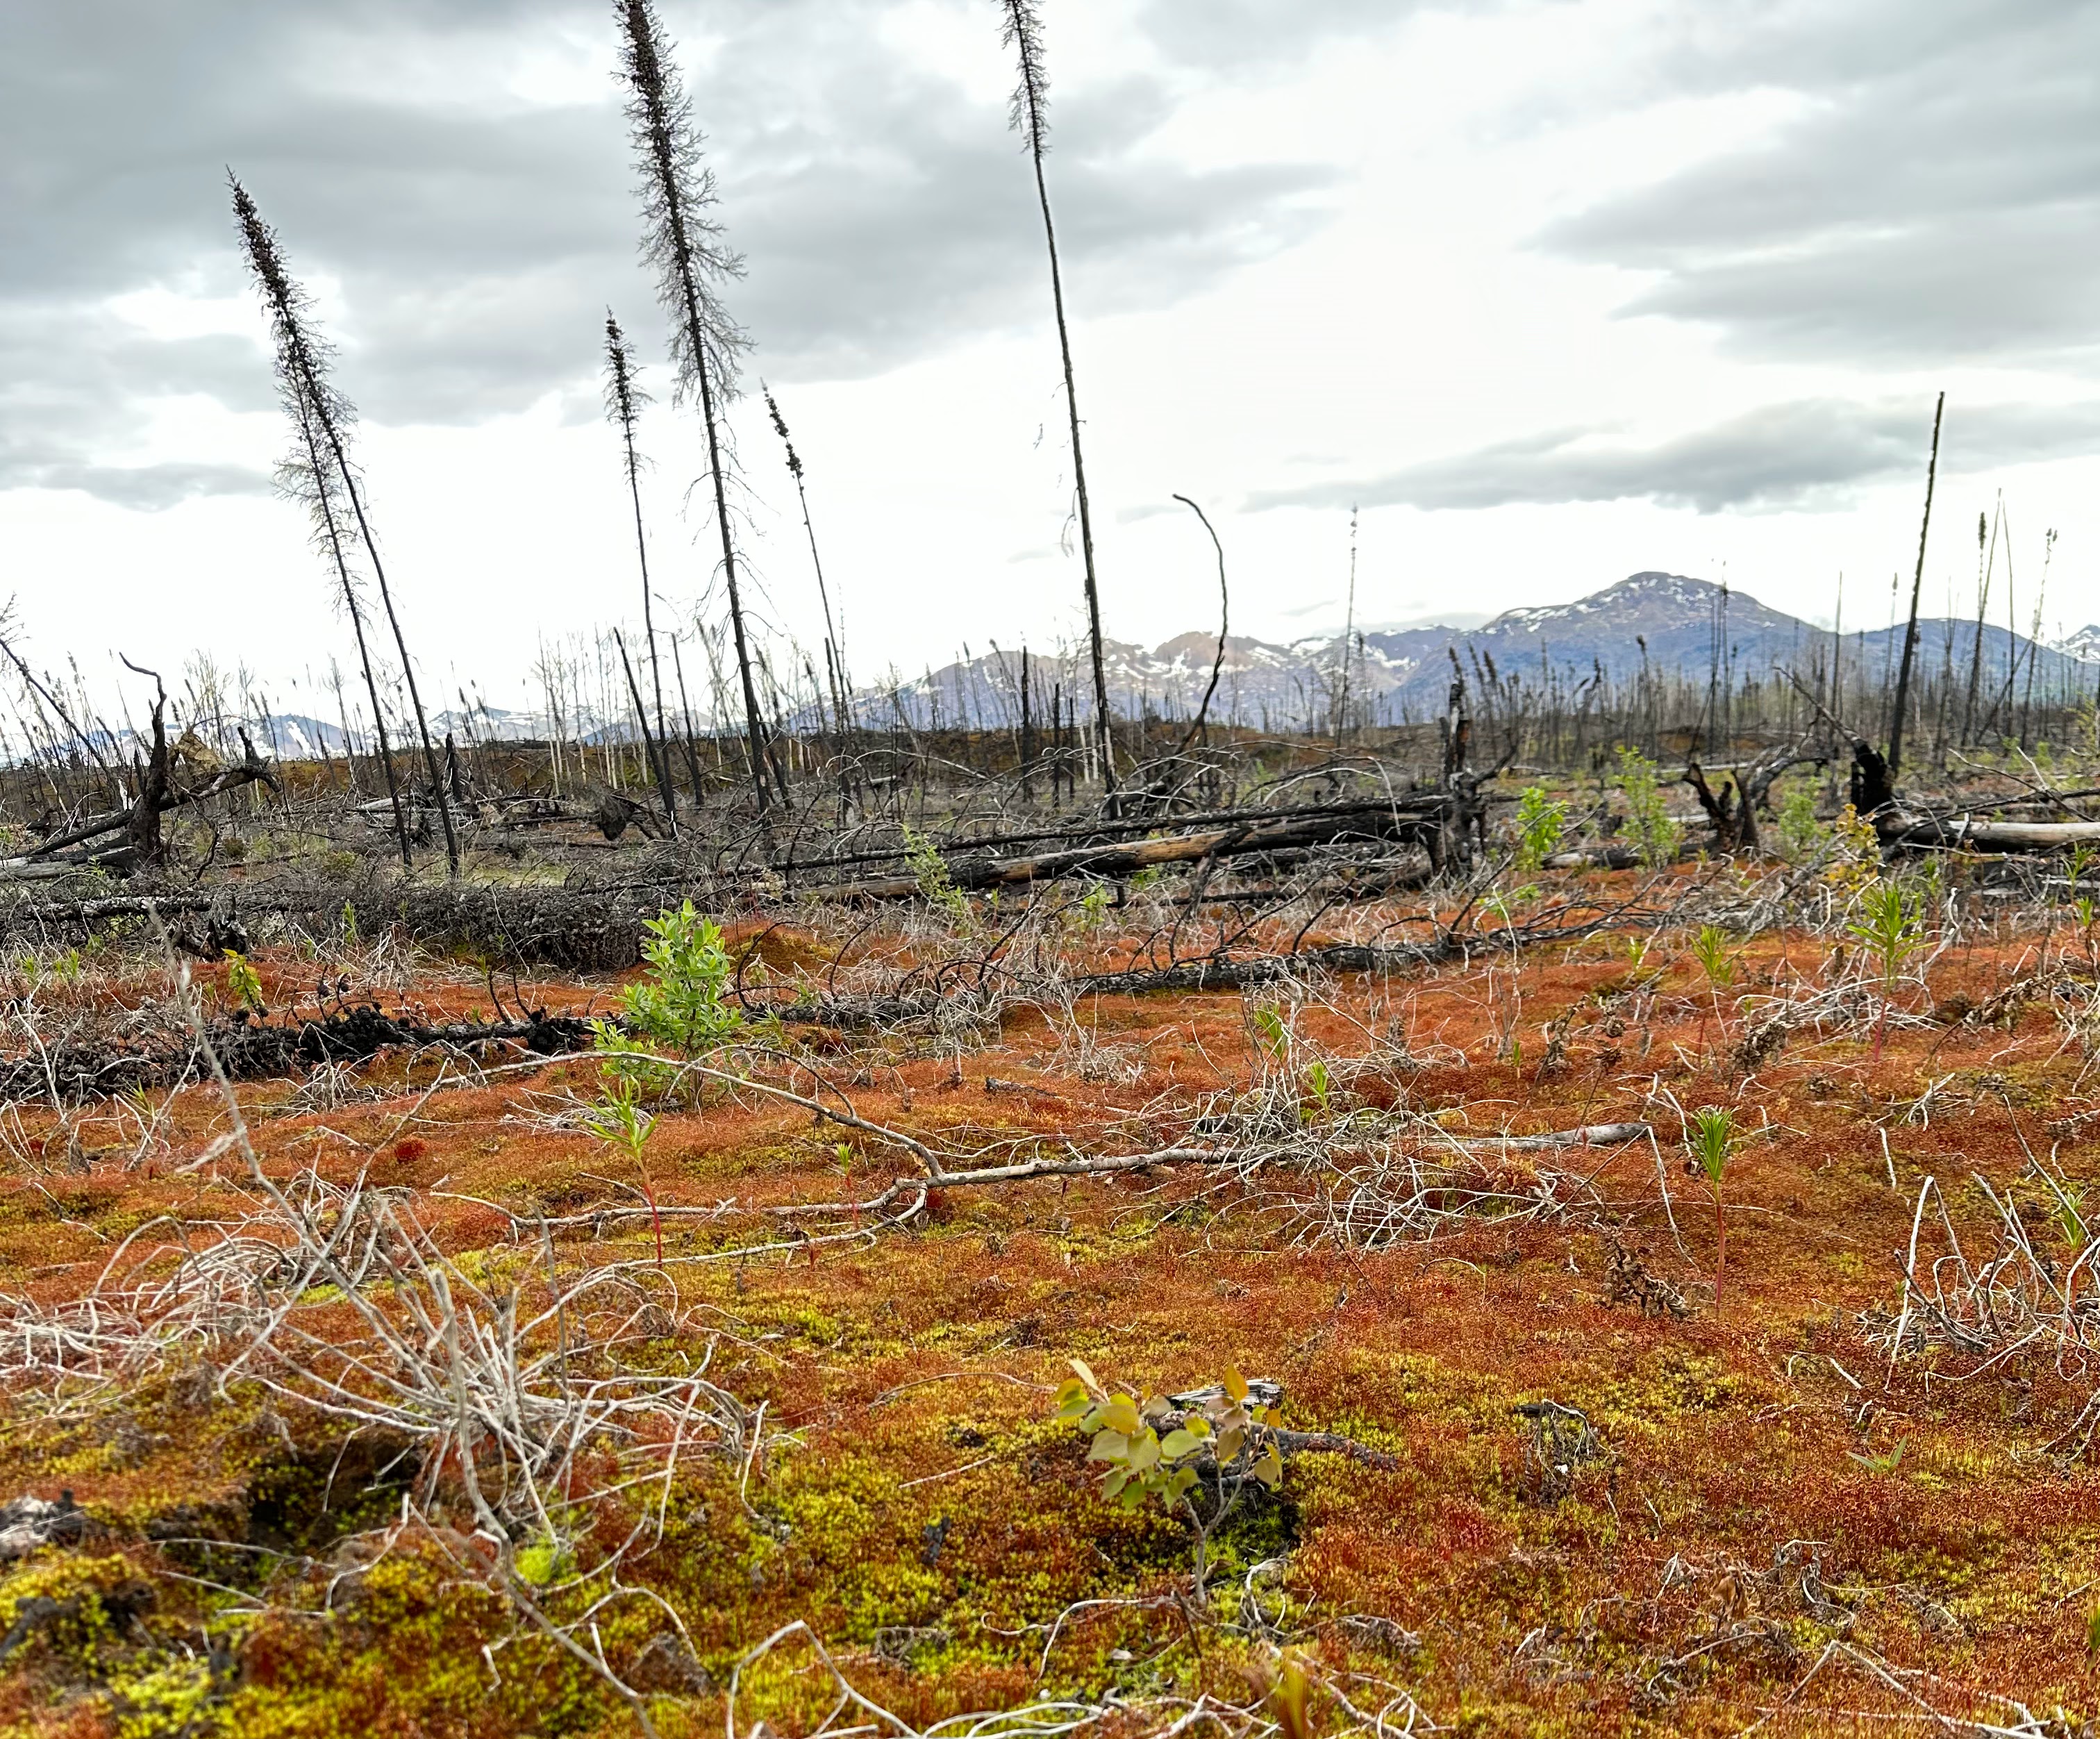 Burned forest in regrowth